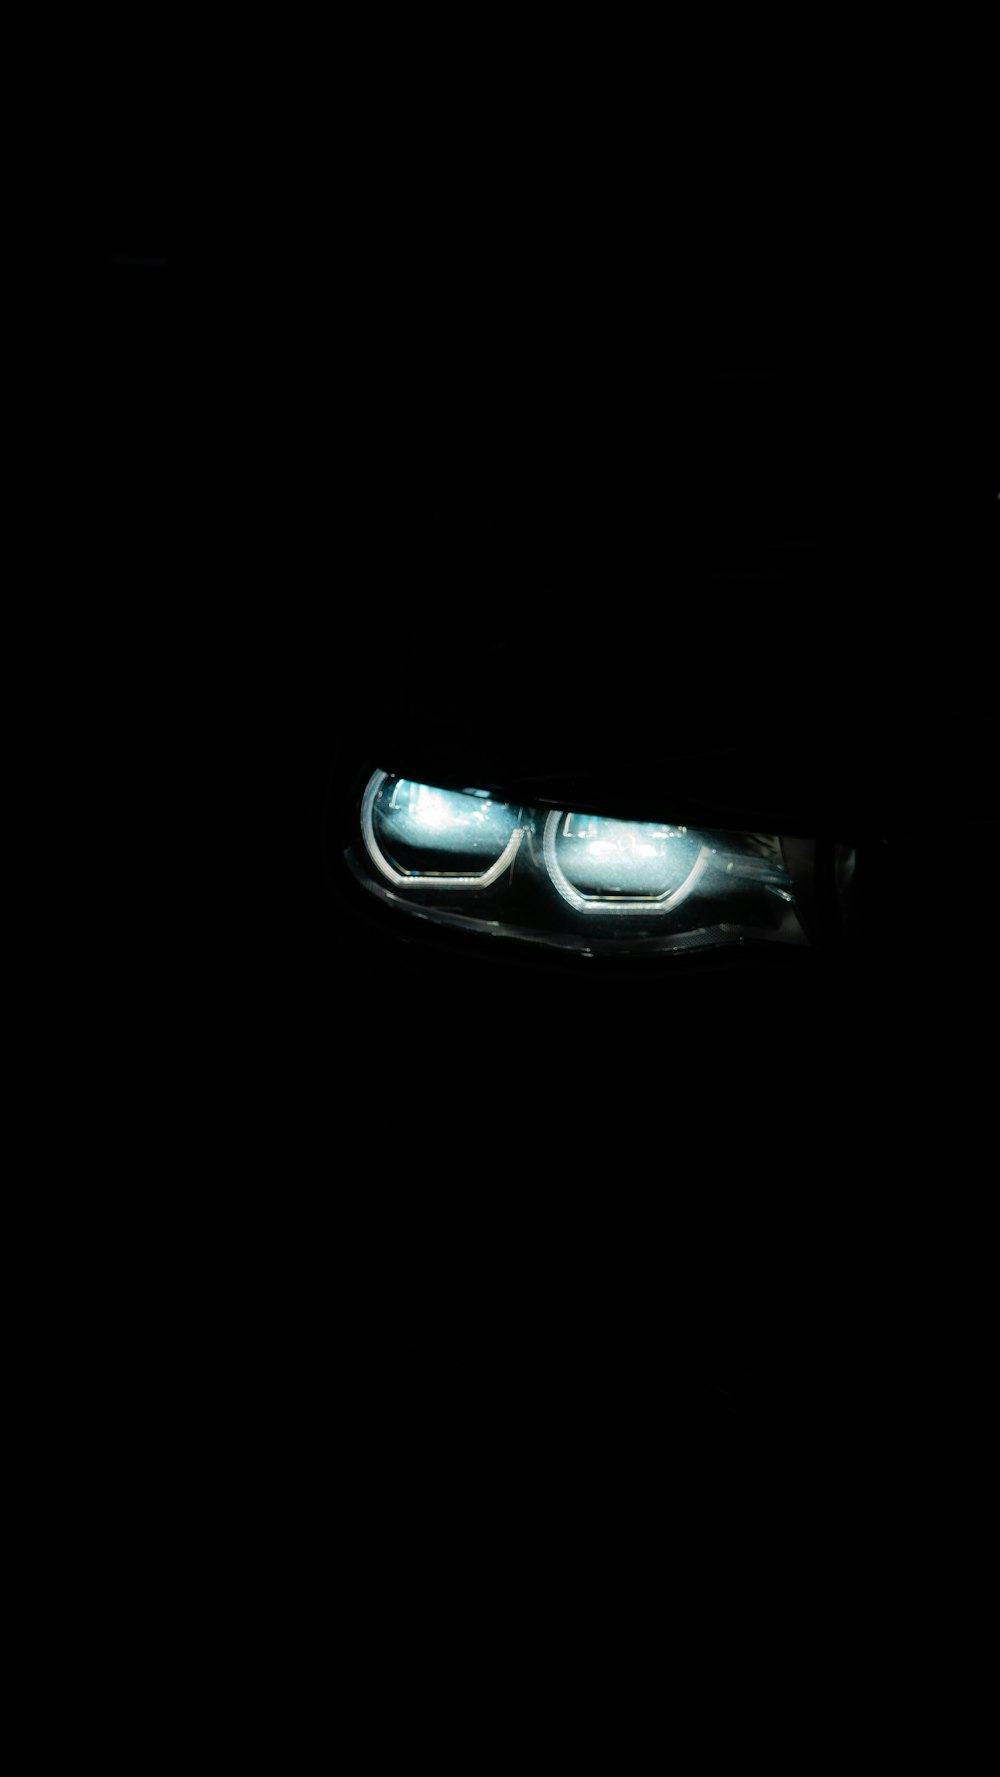 the headlights of a car in the dark